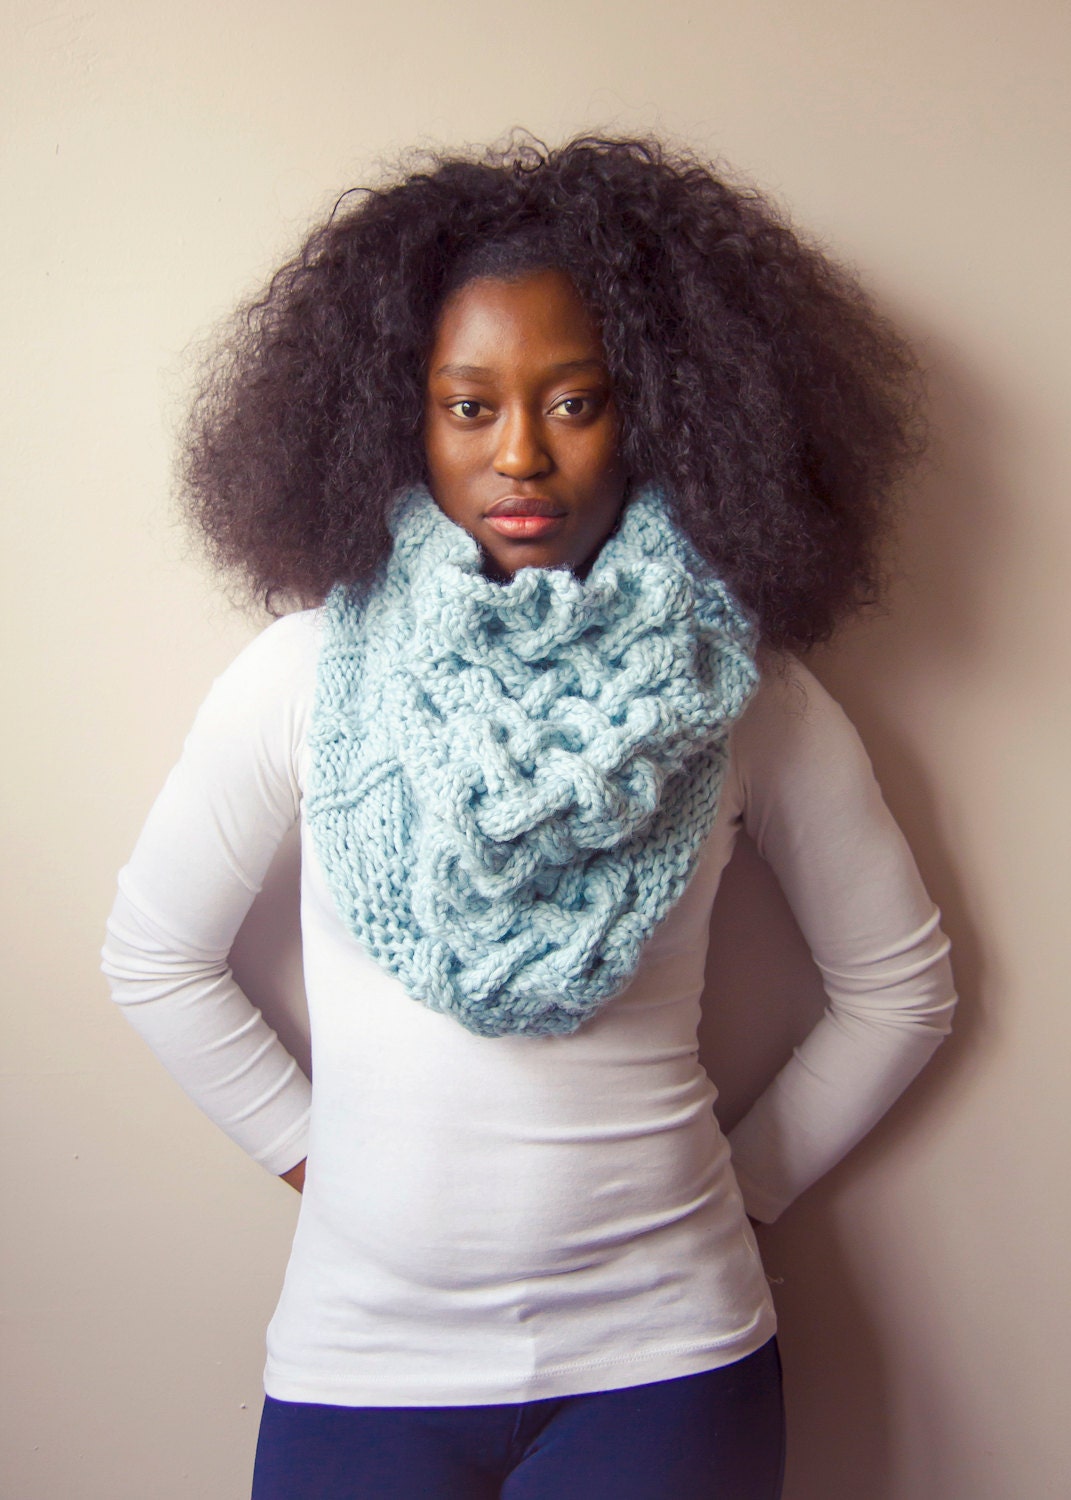 Oversized Cowl, Baby Blue Scarf, Cable Knit Cowl, Chunky Cowl, Hand Knit Infinity Scarf, Light Blue Infinity Scarf, Blue Shawl, - EmbraceTheLamb